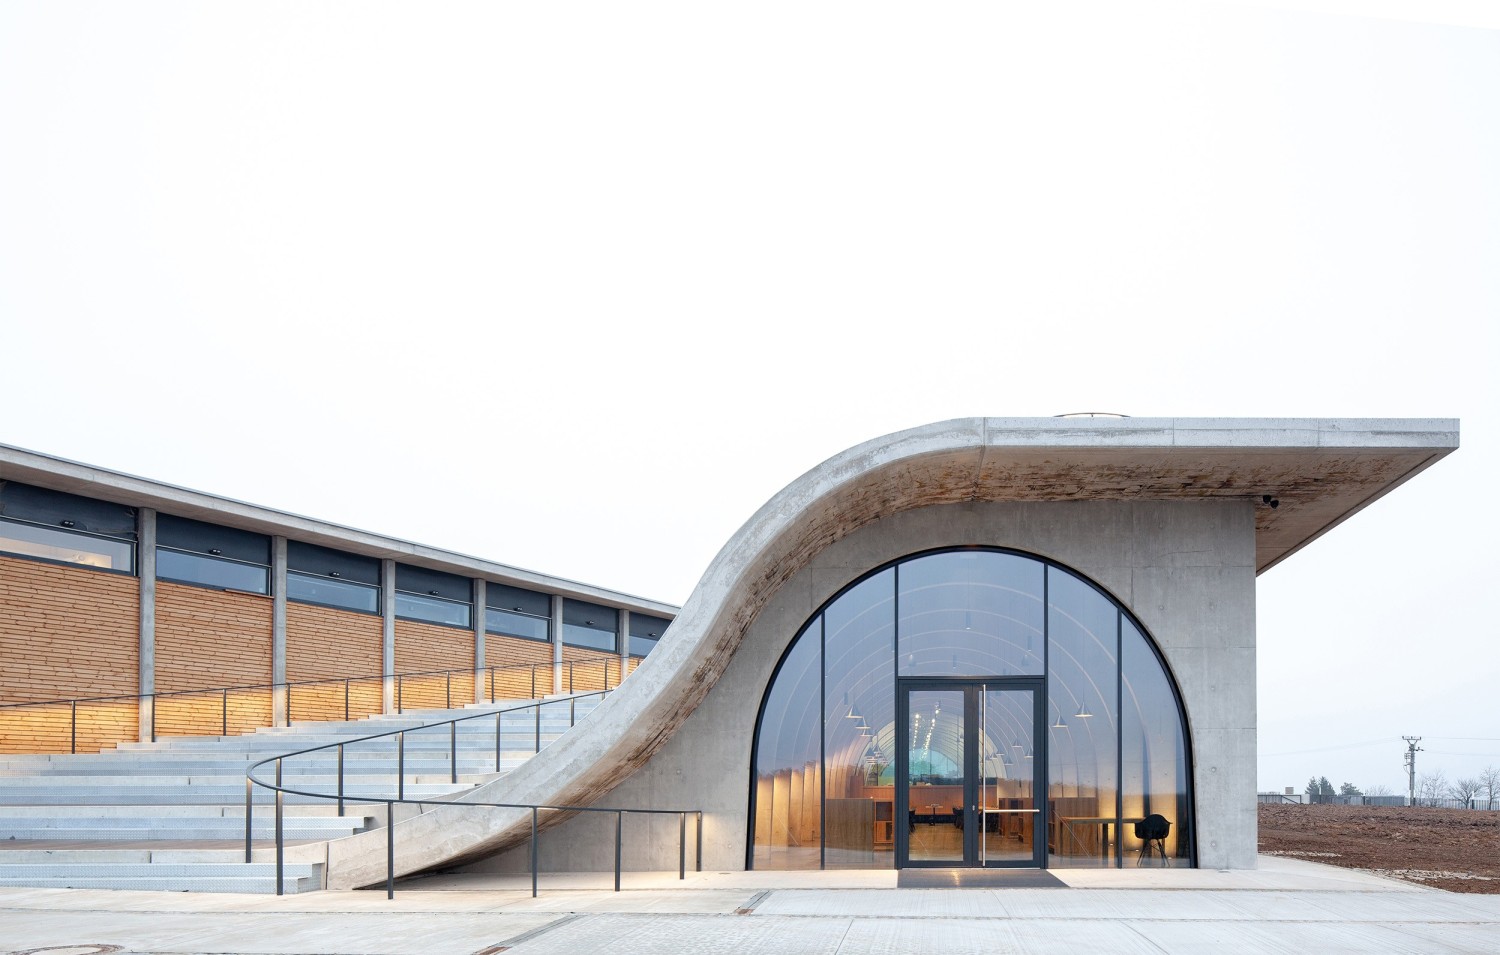 towered by the concave roof of the amphitheater, the space